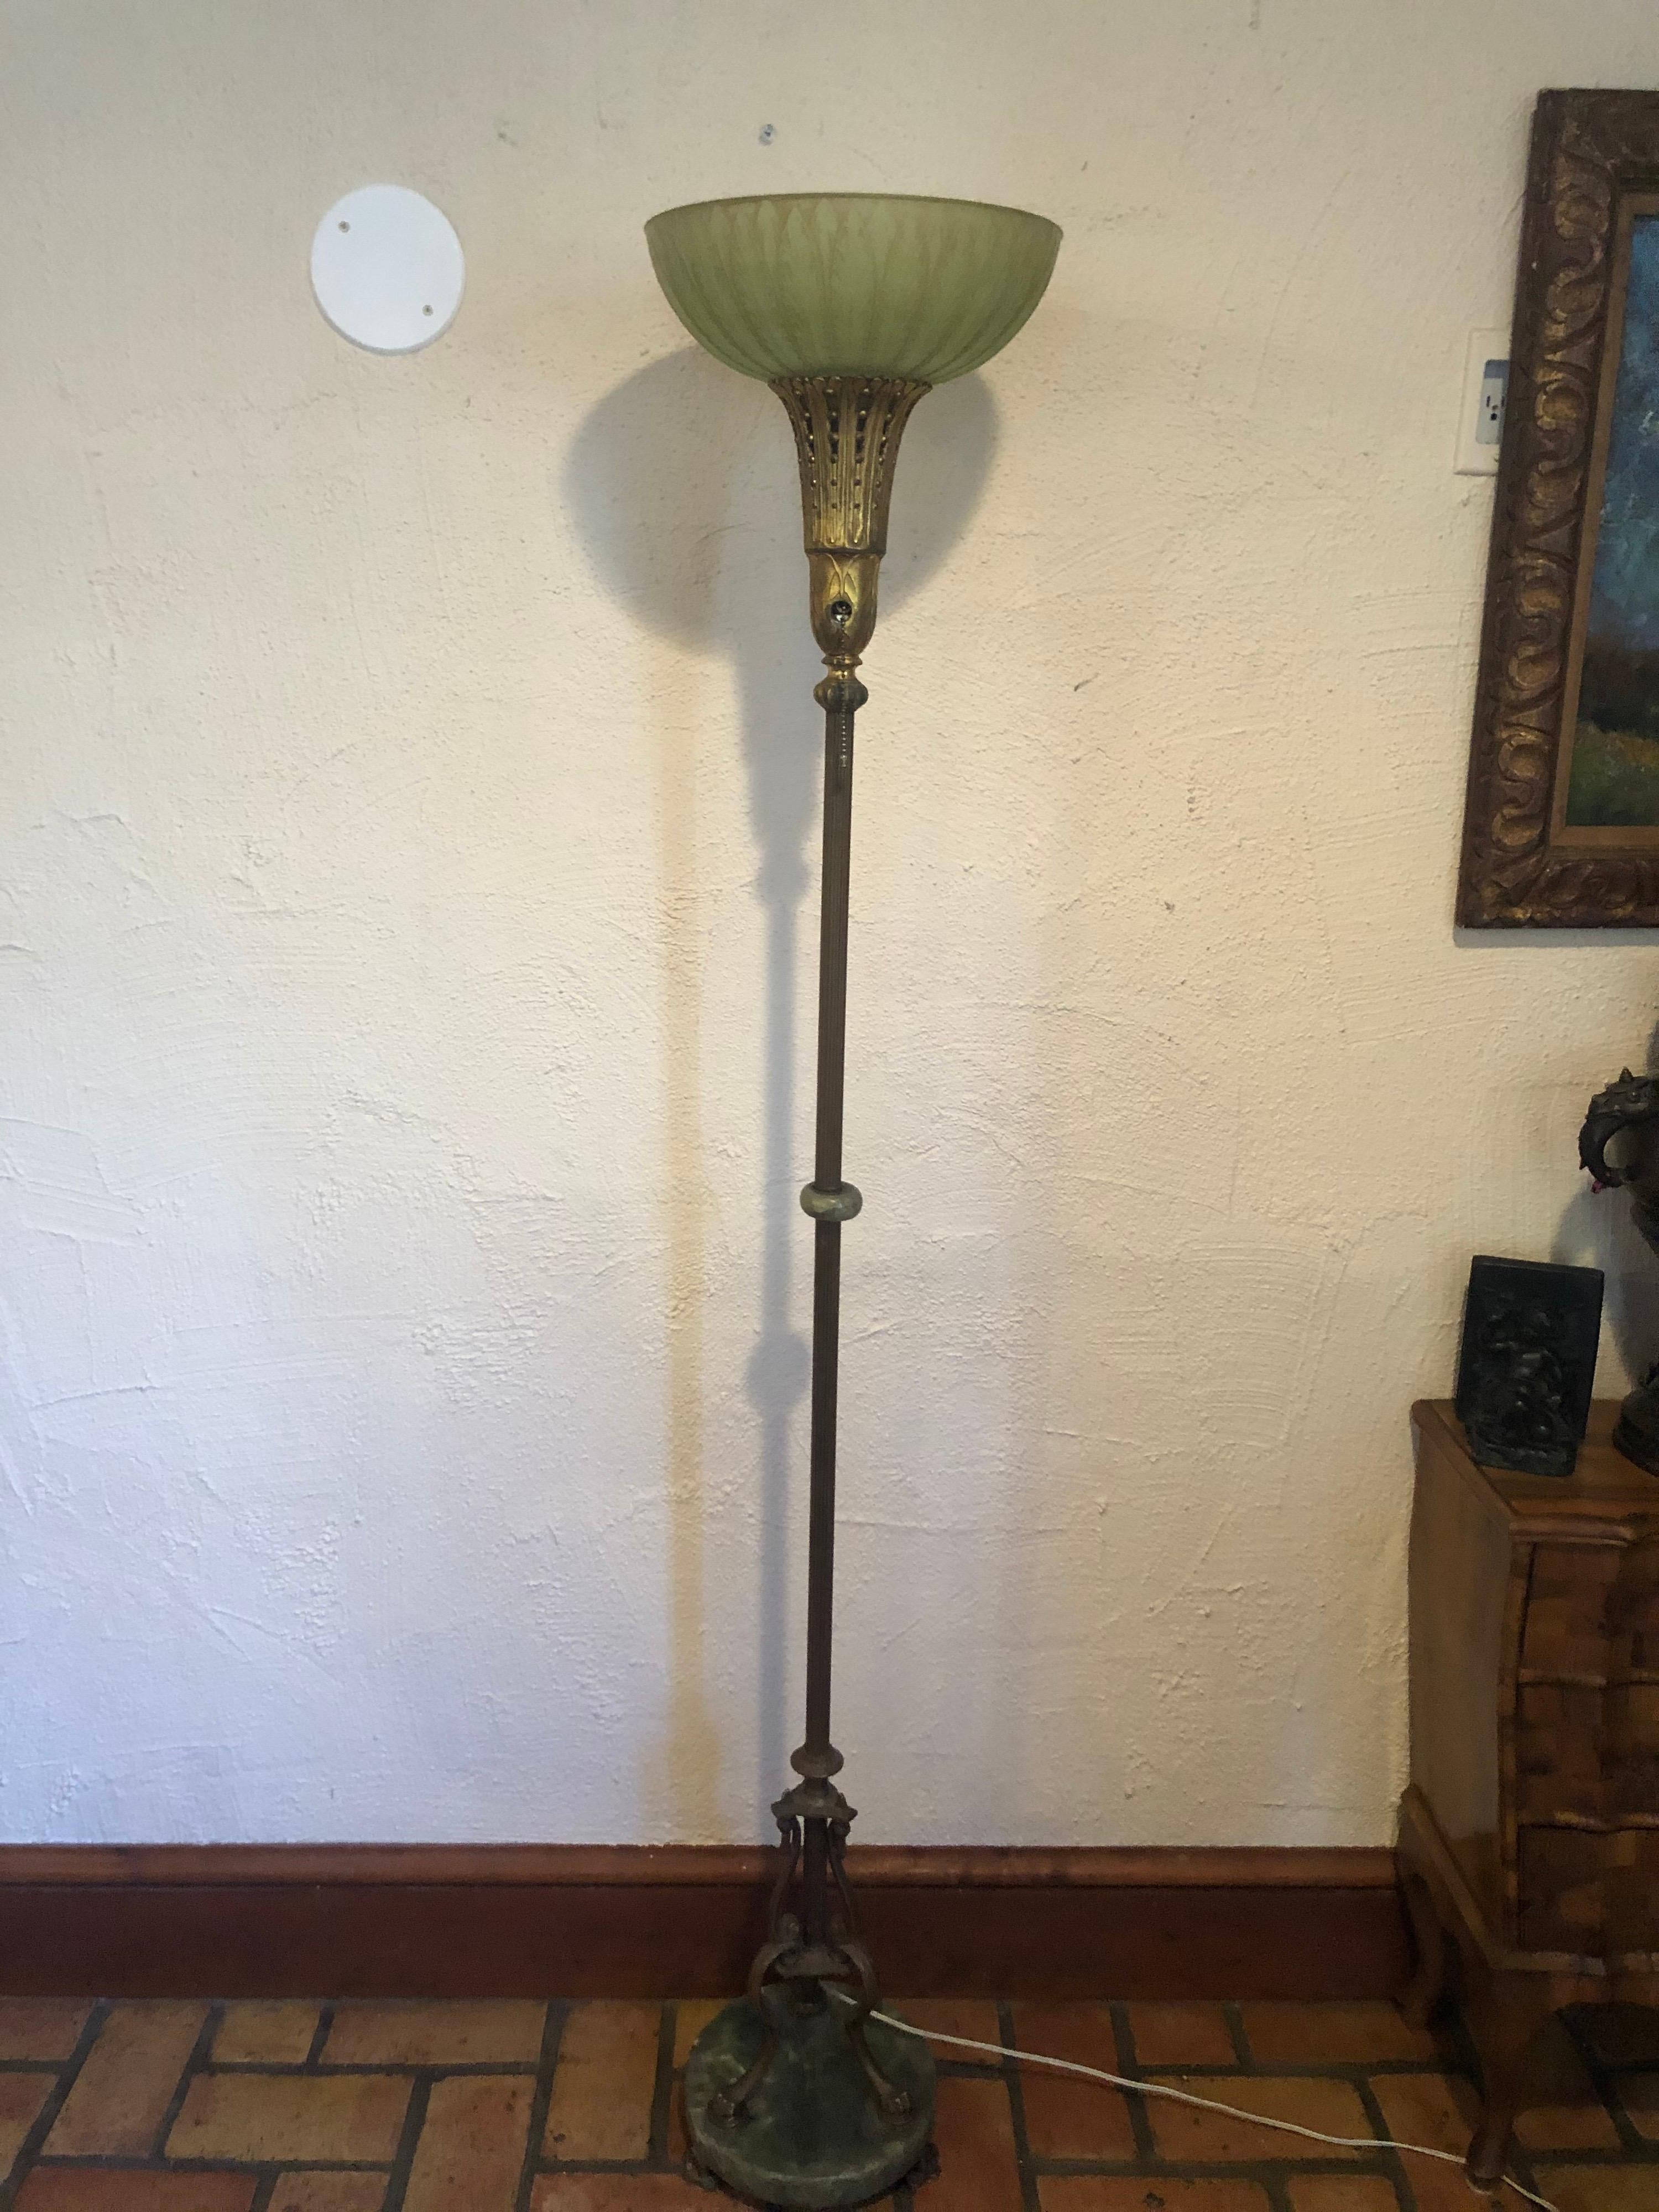 Antique Art Deco floor lamp. Intricate designed art glass open shade with elaborately detailed metal design. Green agate accent in the middle of the floor lamp trunk and impressive round green marble base with brass paw feet. Fully functioning pull